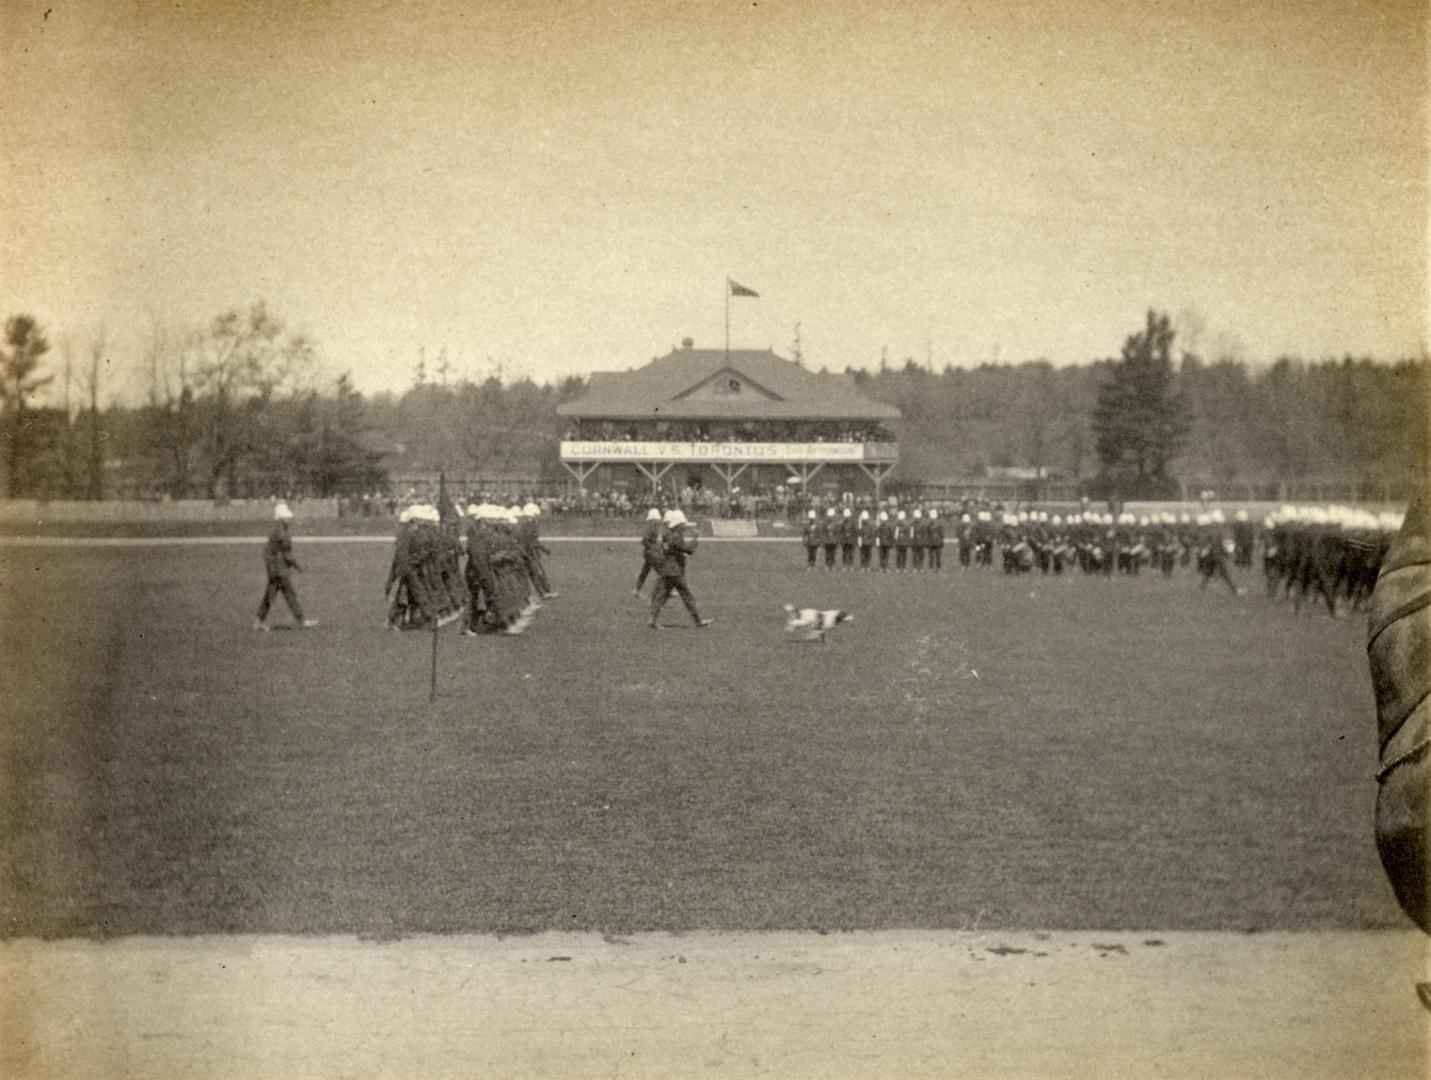 Image shows club members on the field.